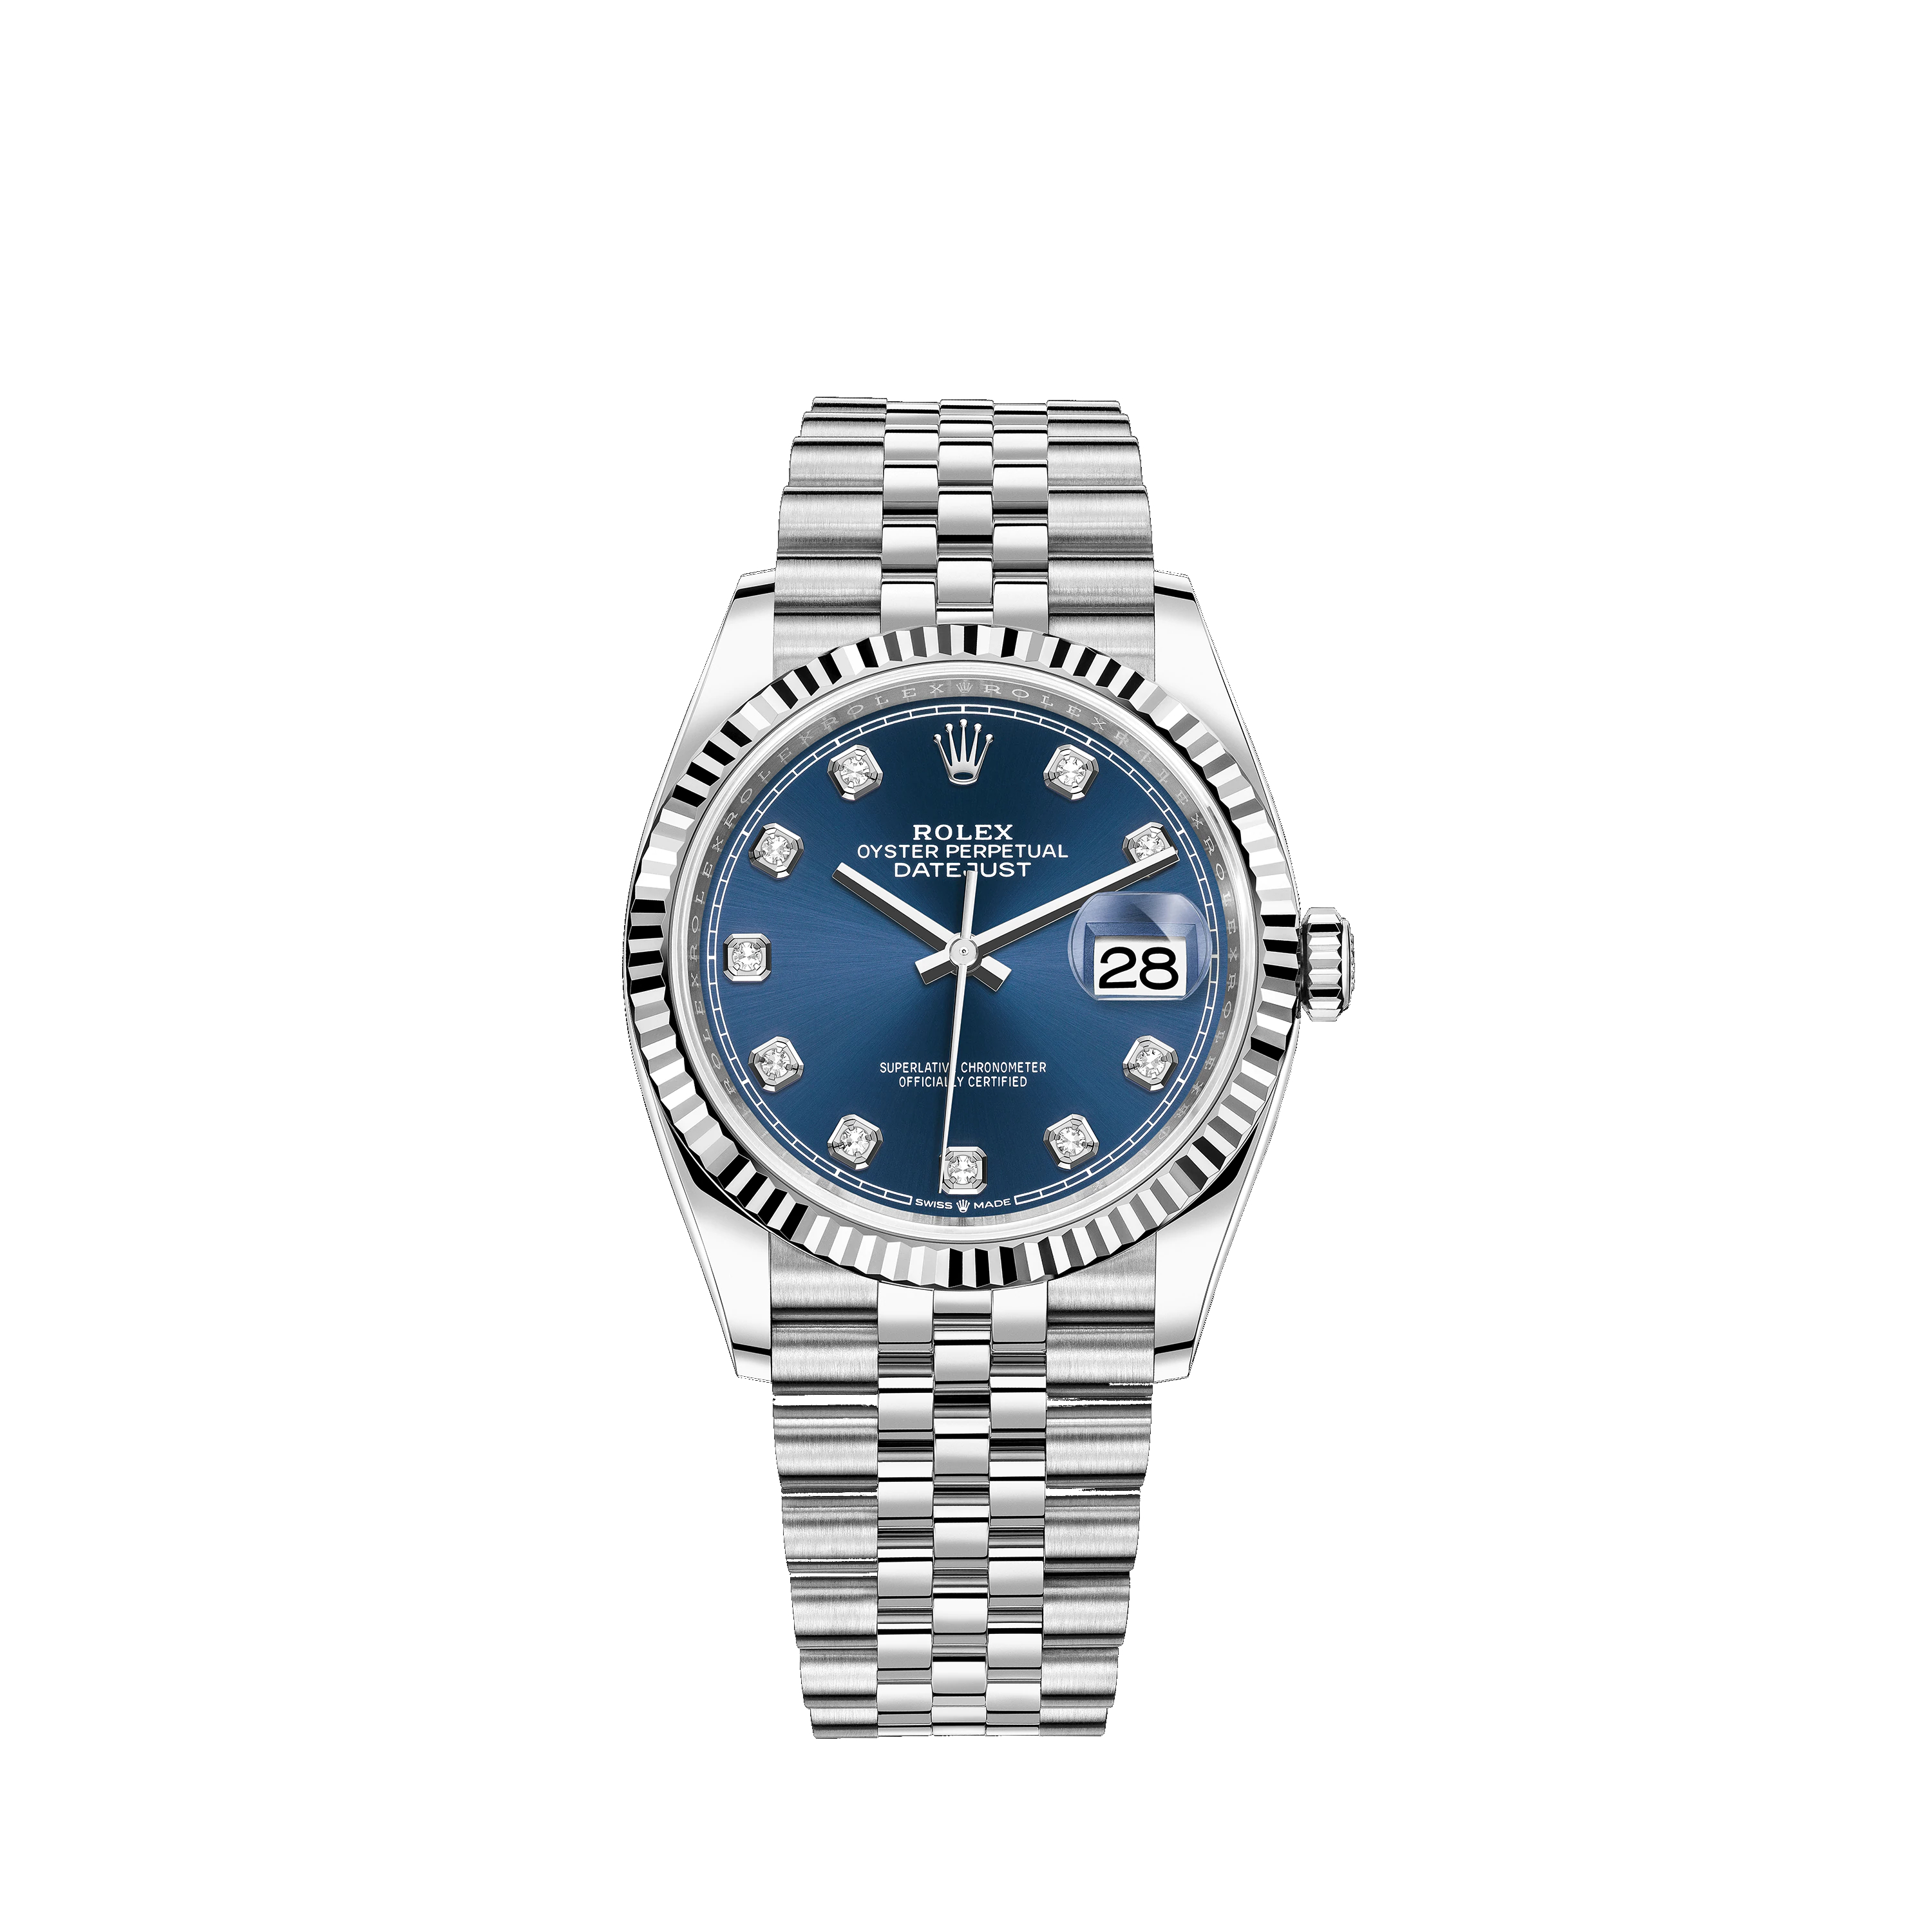 Datejust 36 126234 White Gold & Stainless Steel Watch (Blue Set with Diamonds)